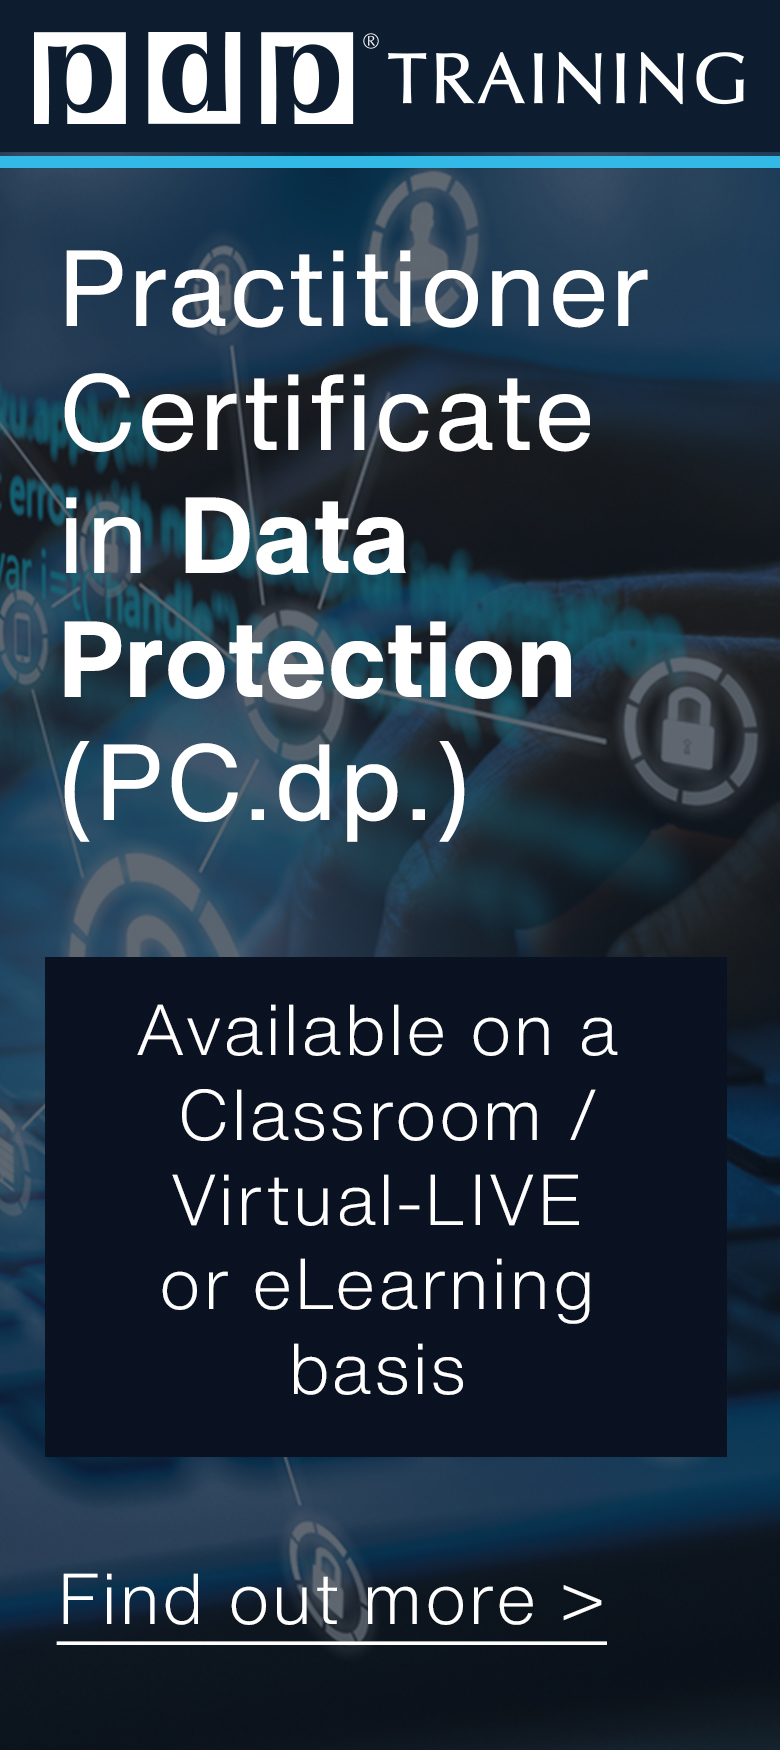 Qualify as a Data Protection Practitioner